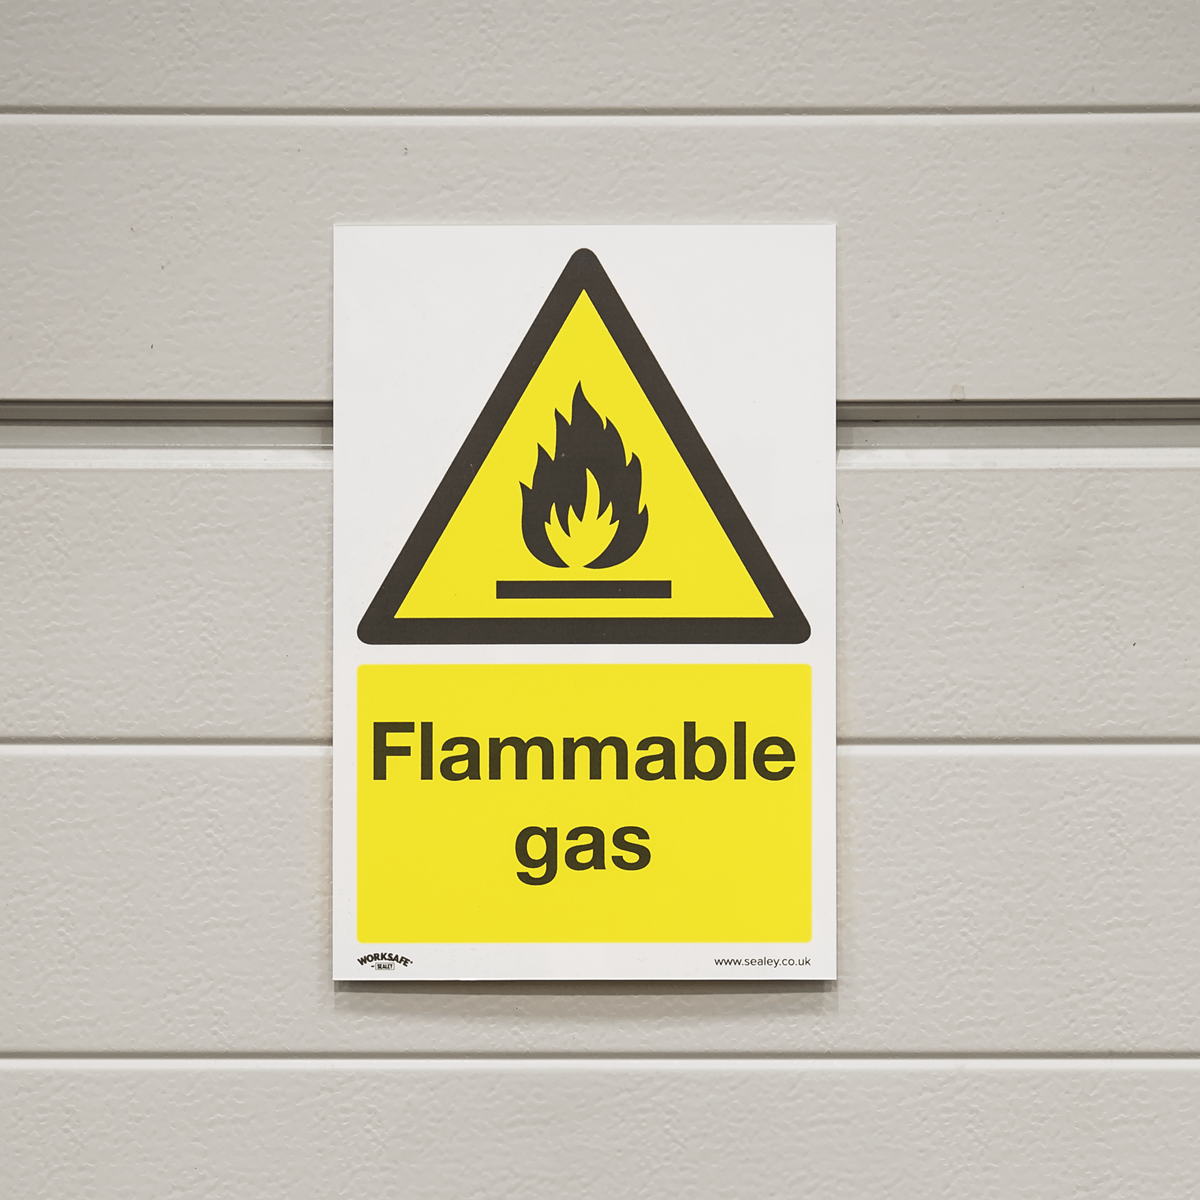 Sealey Warning Safety Sign - Flammable Gas - Self-Adhesive Vinyl